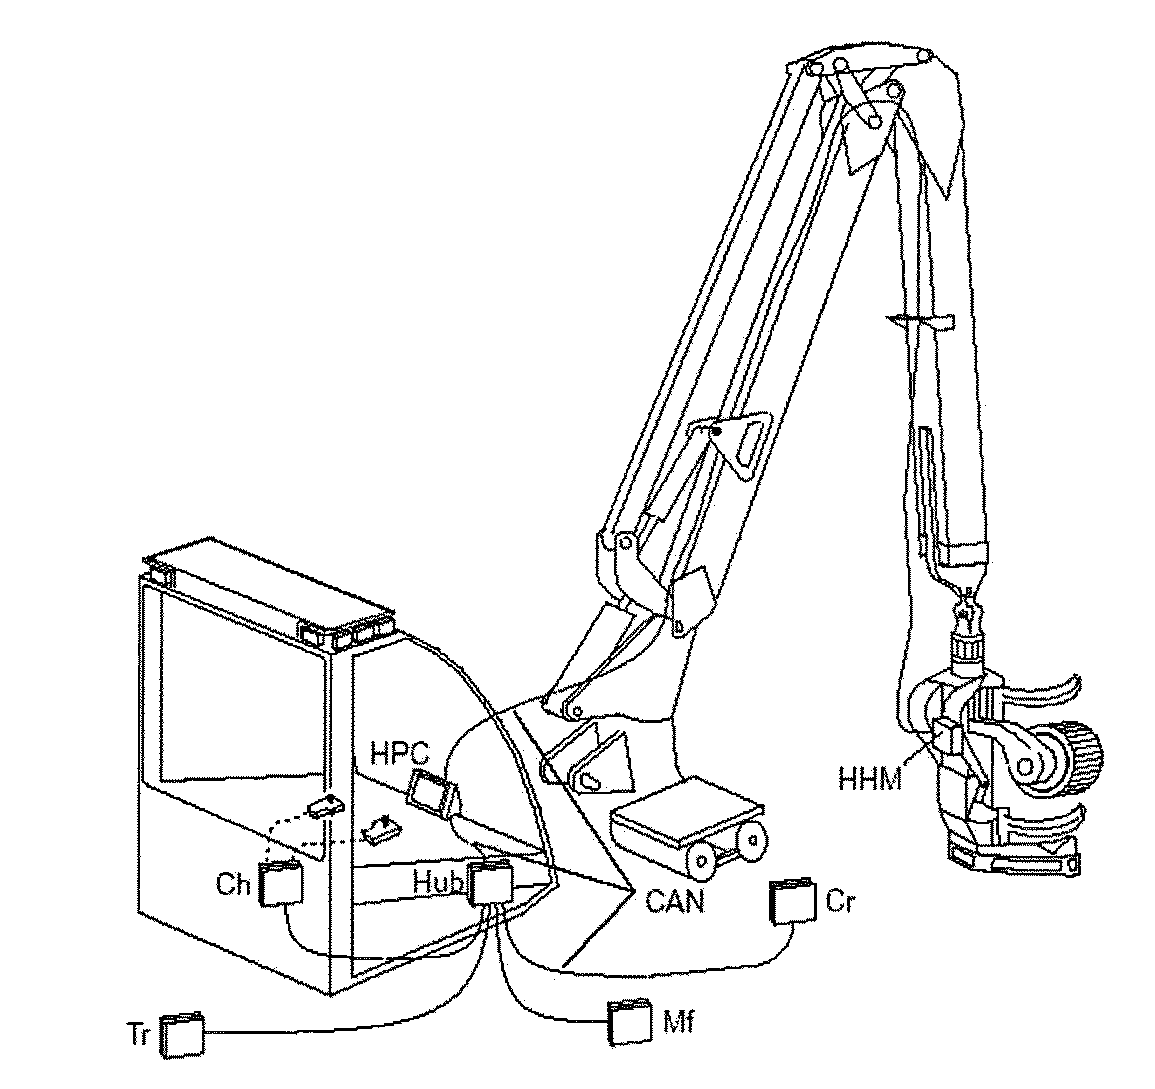 System for evaluating the productivity of a working machine and its driver